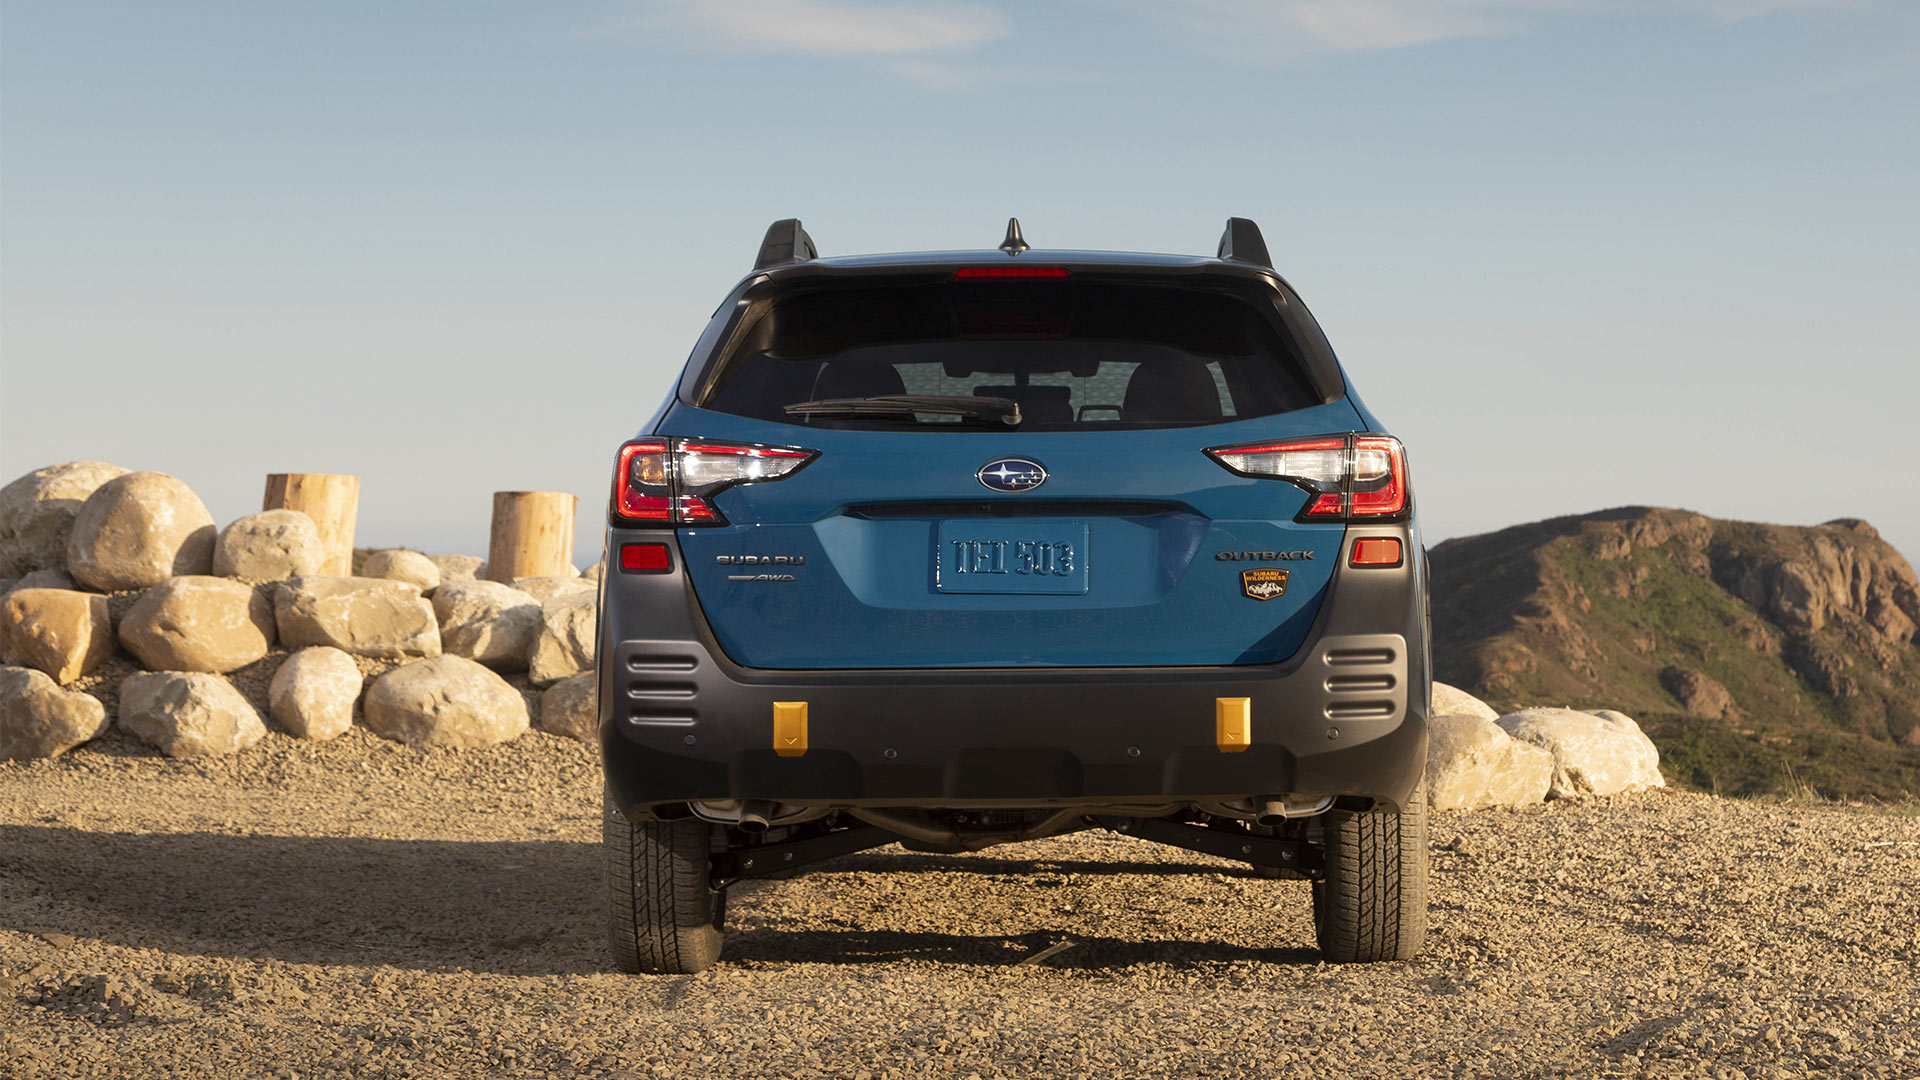 The Subaru Outback Wilderness Rear View